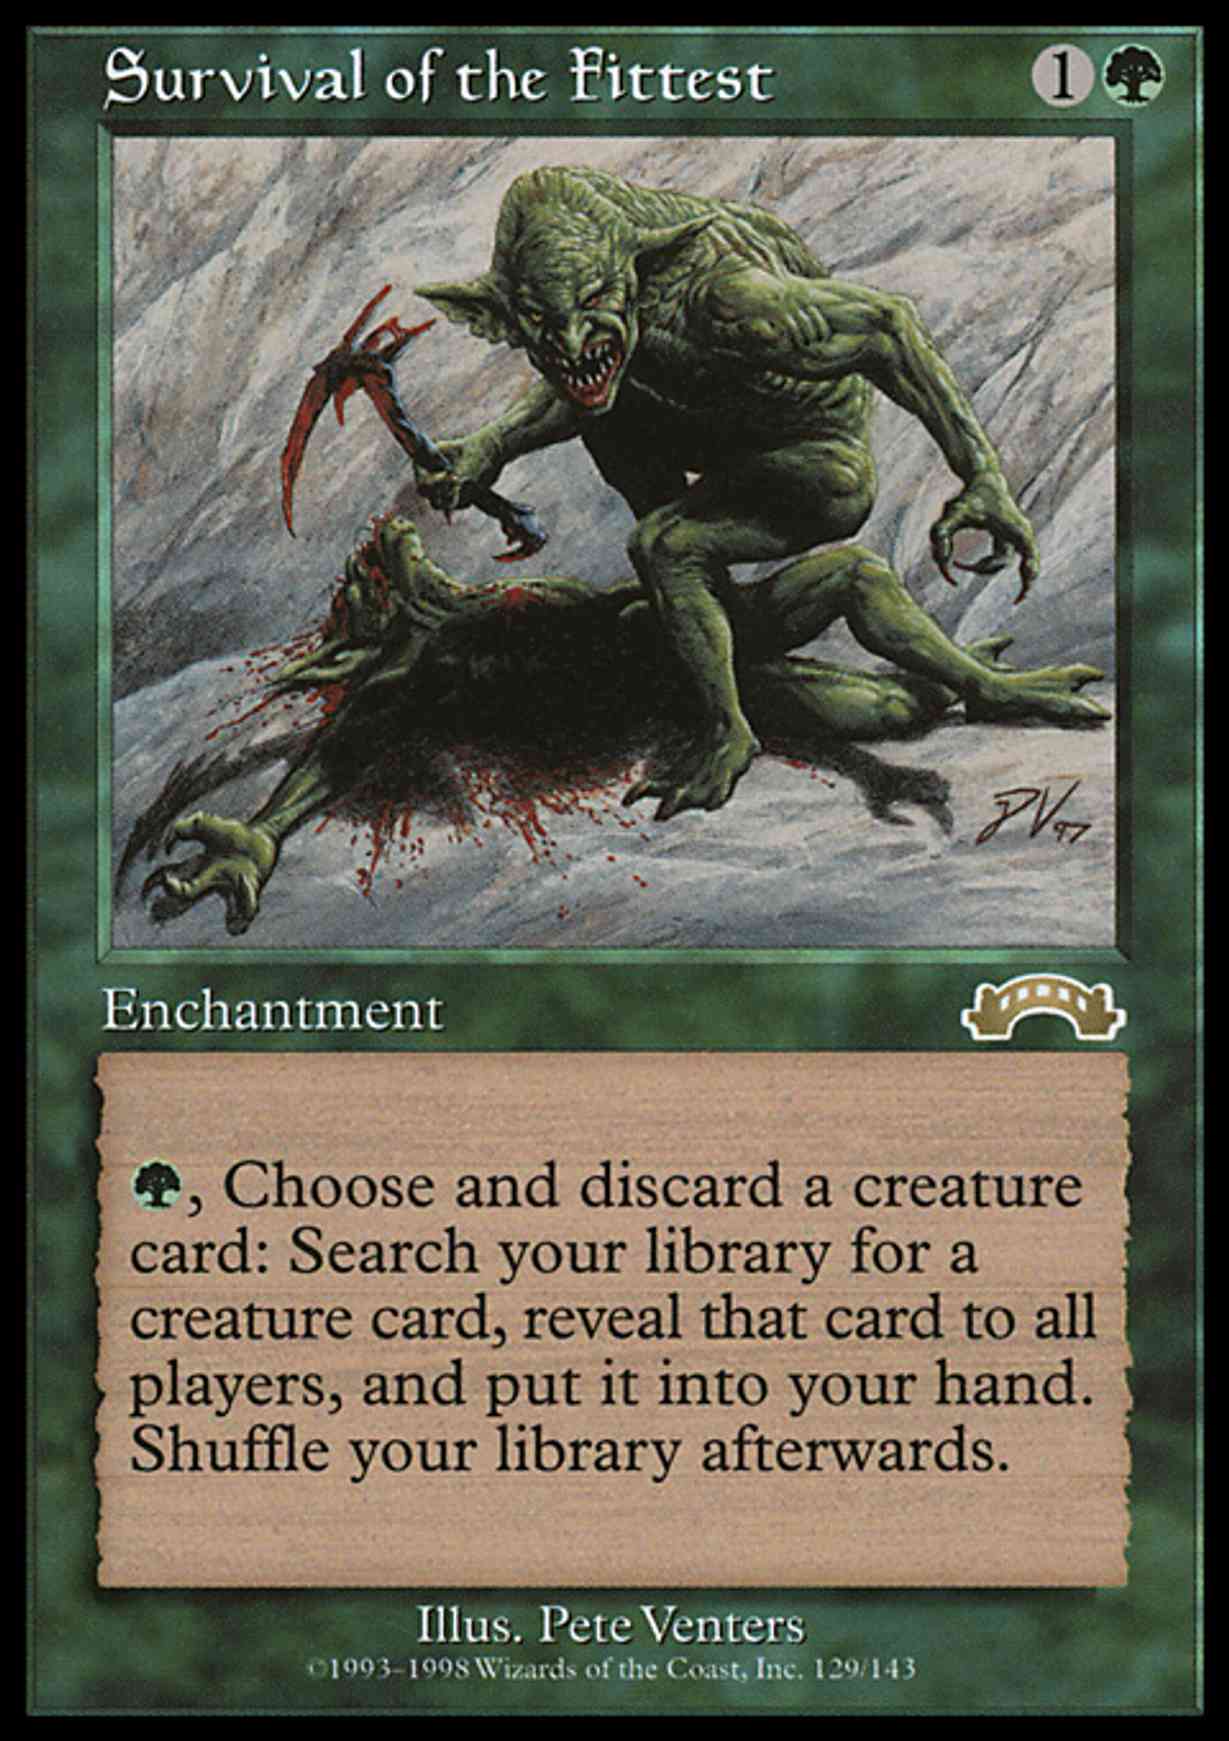 Survival of the Fittest magic card front